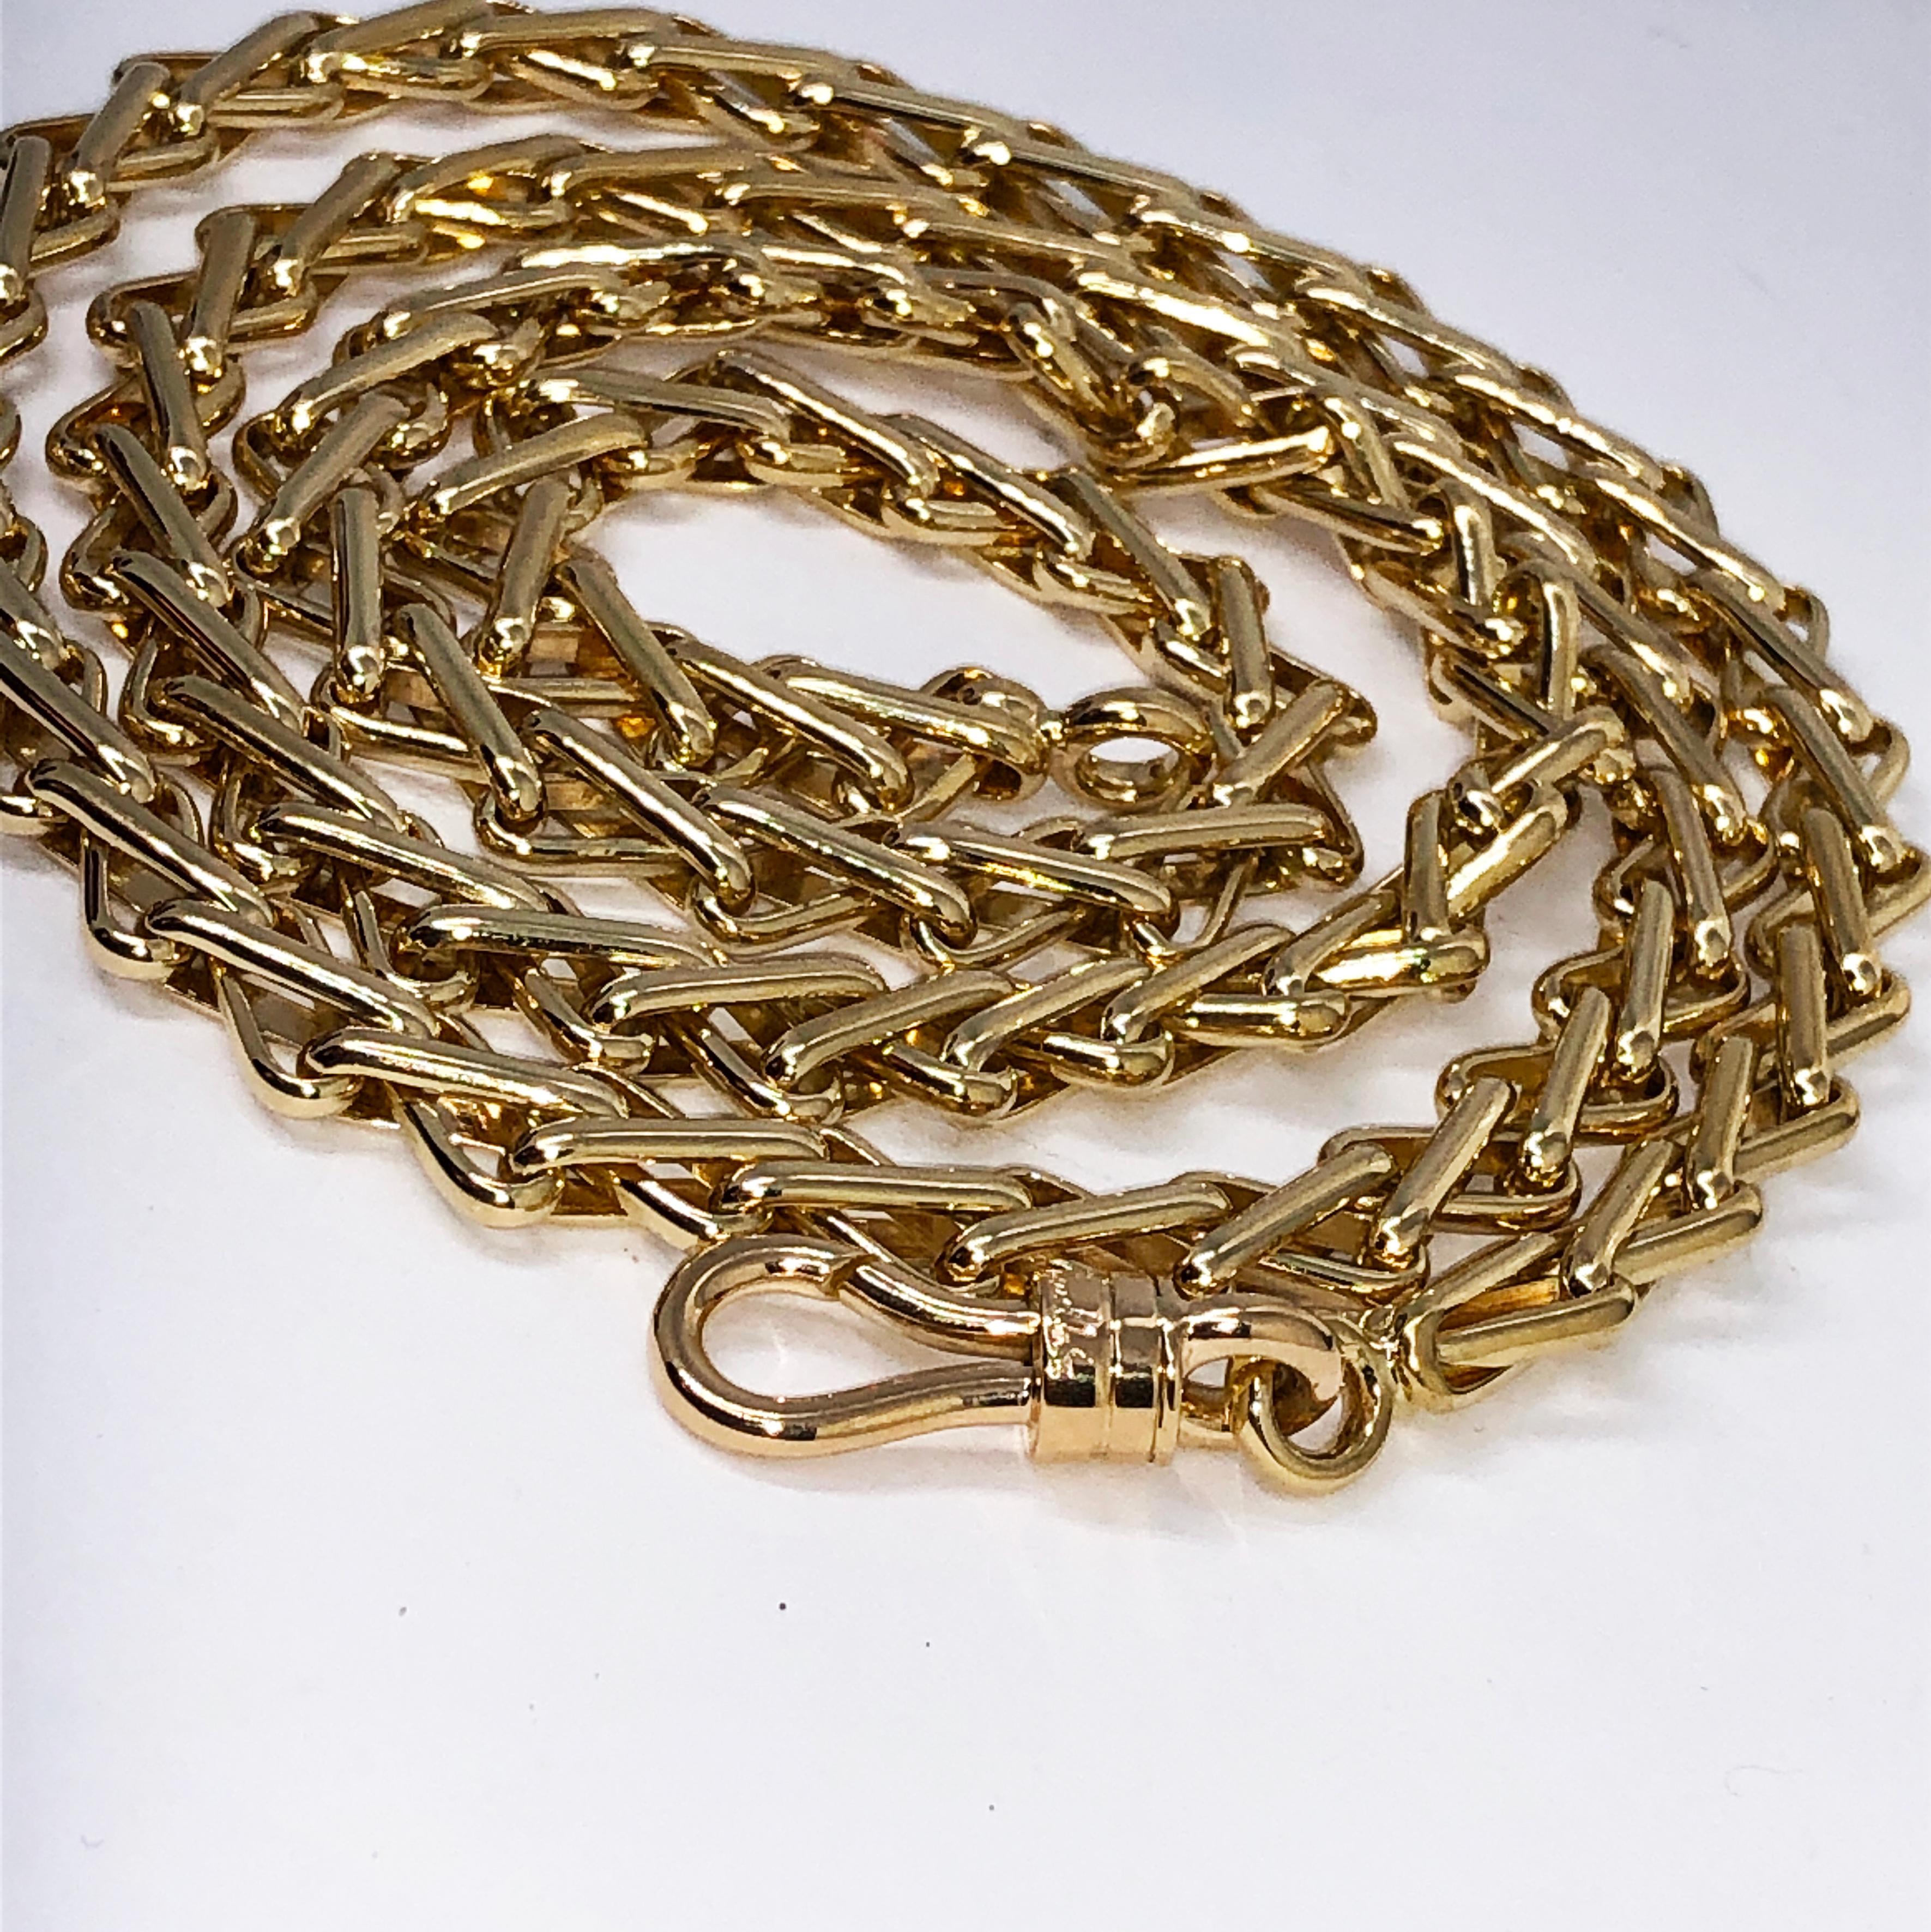 Original 1980 One-of-a-Kind Pomellato 18K Solid Yellow Gold Long Chain Necklace 12